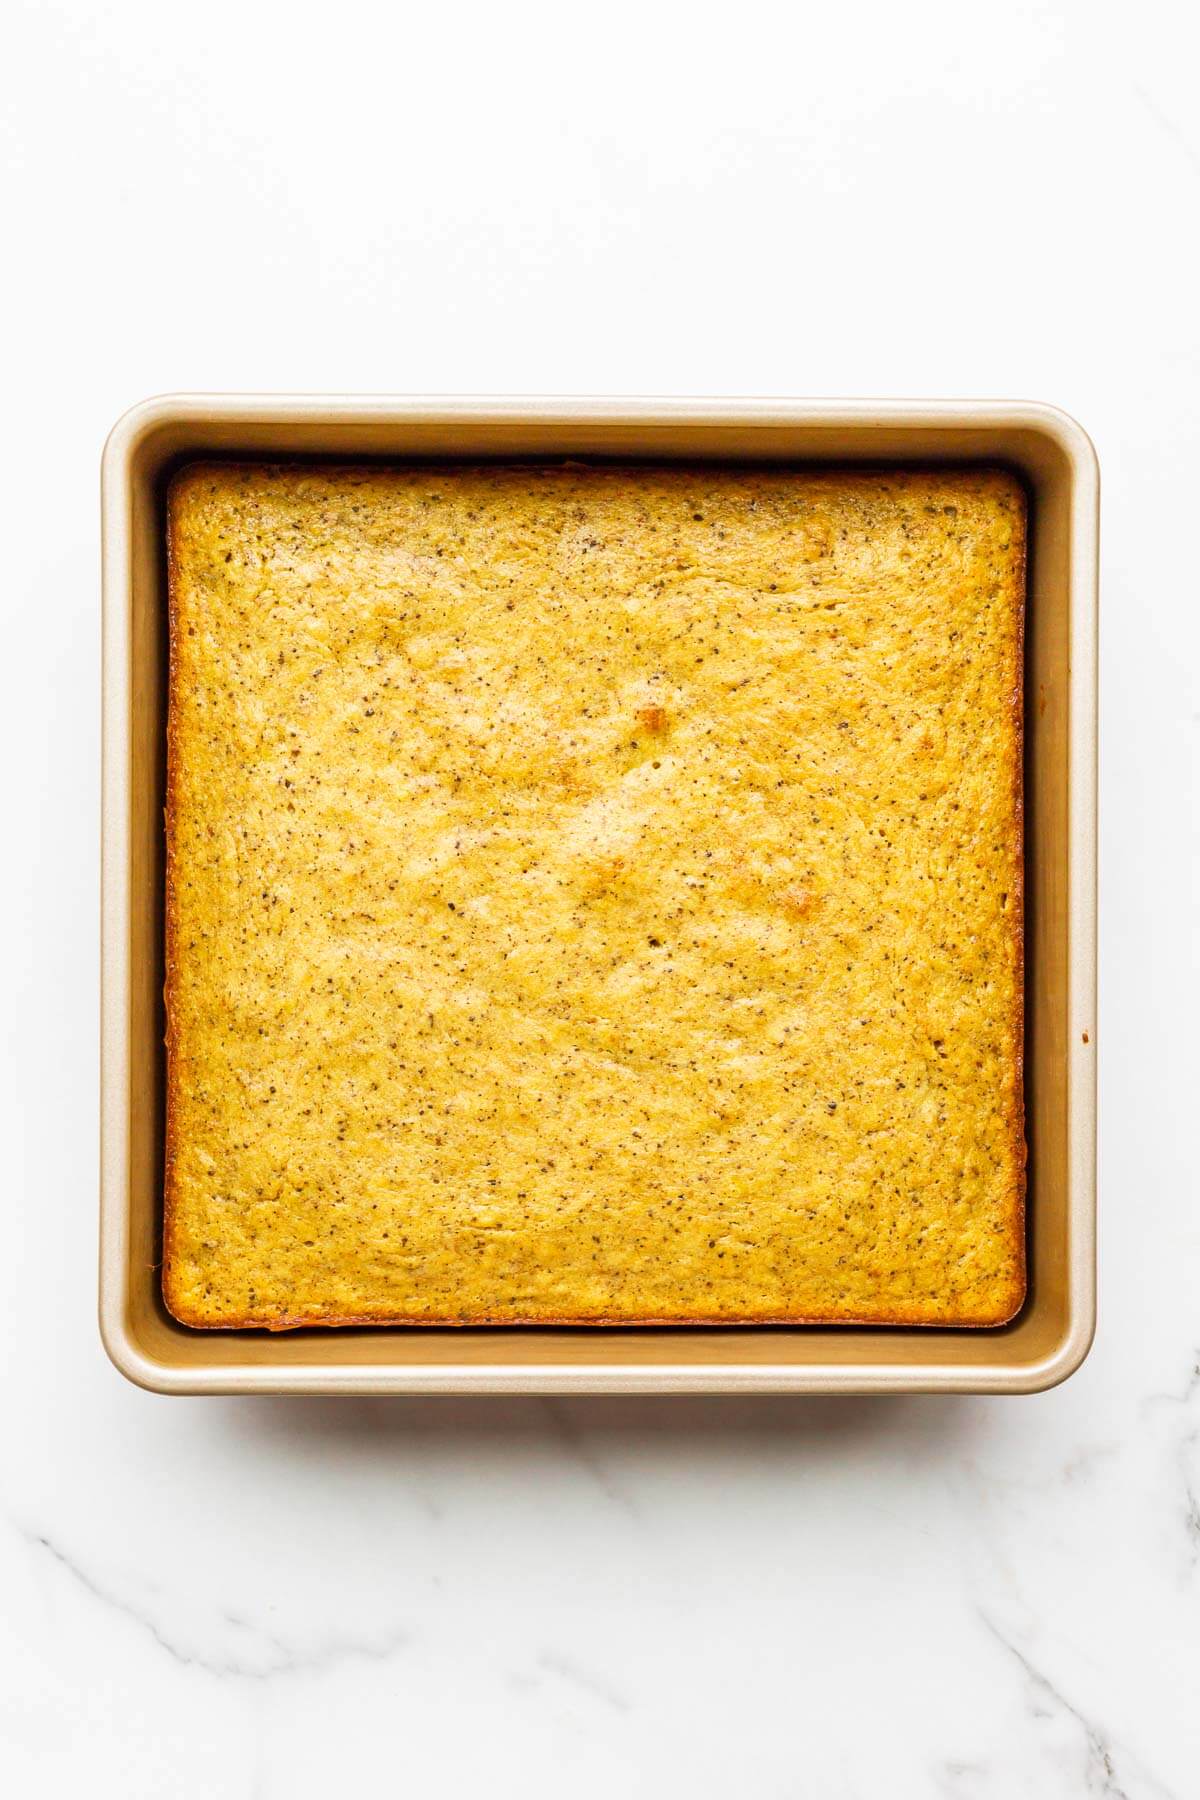 Banana cake with golden brown edges pulling away from the sides of a square cake pan.